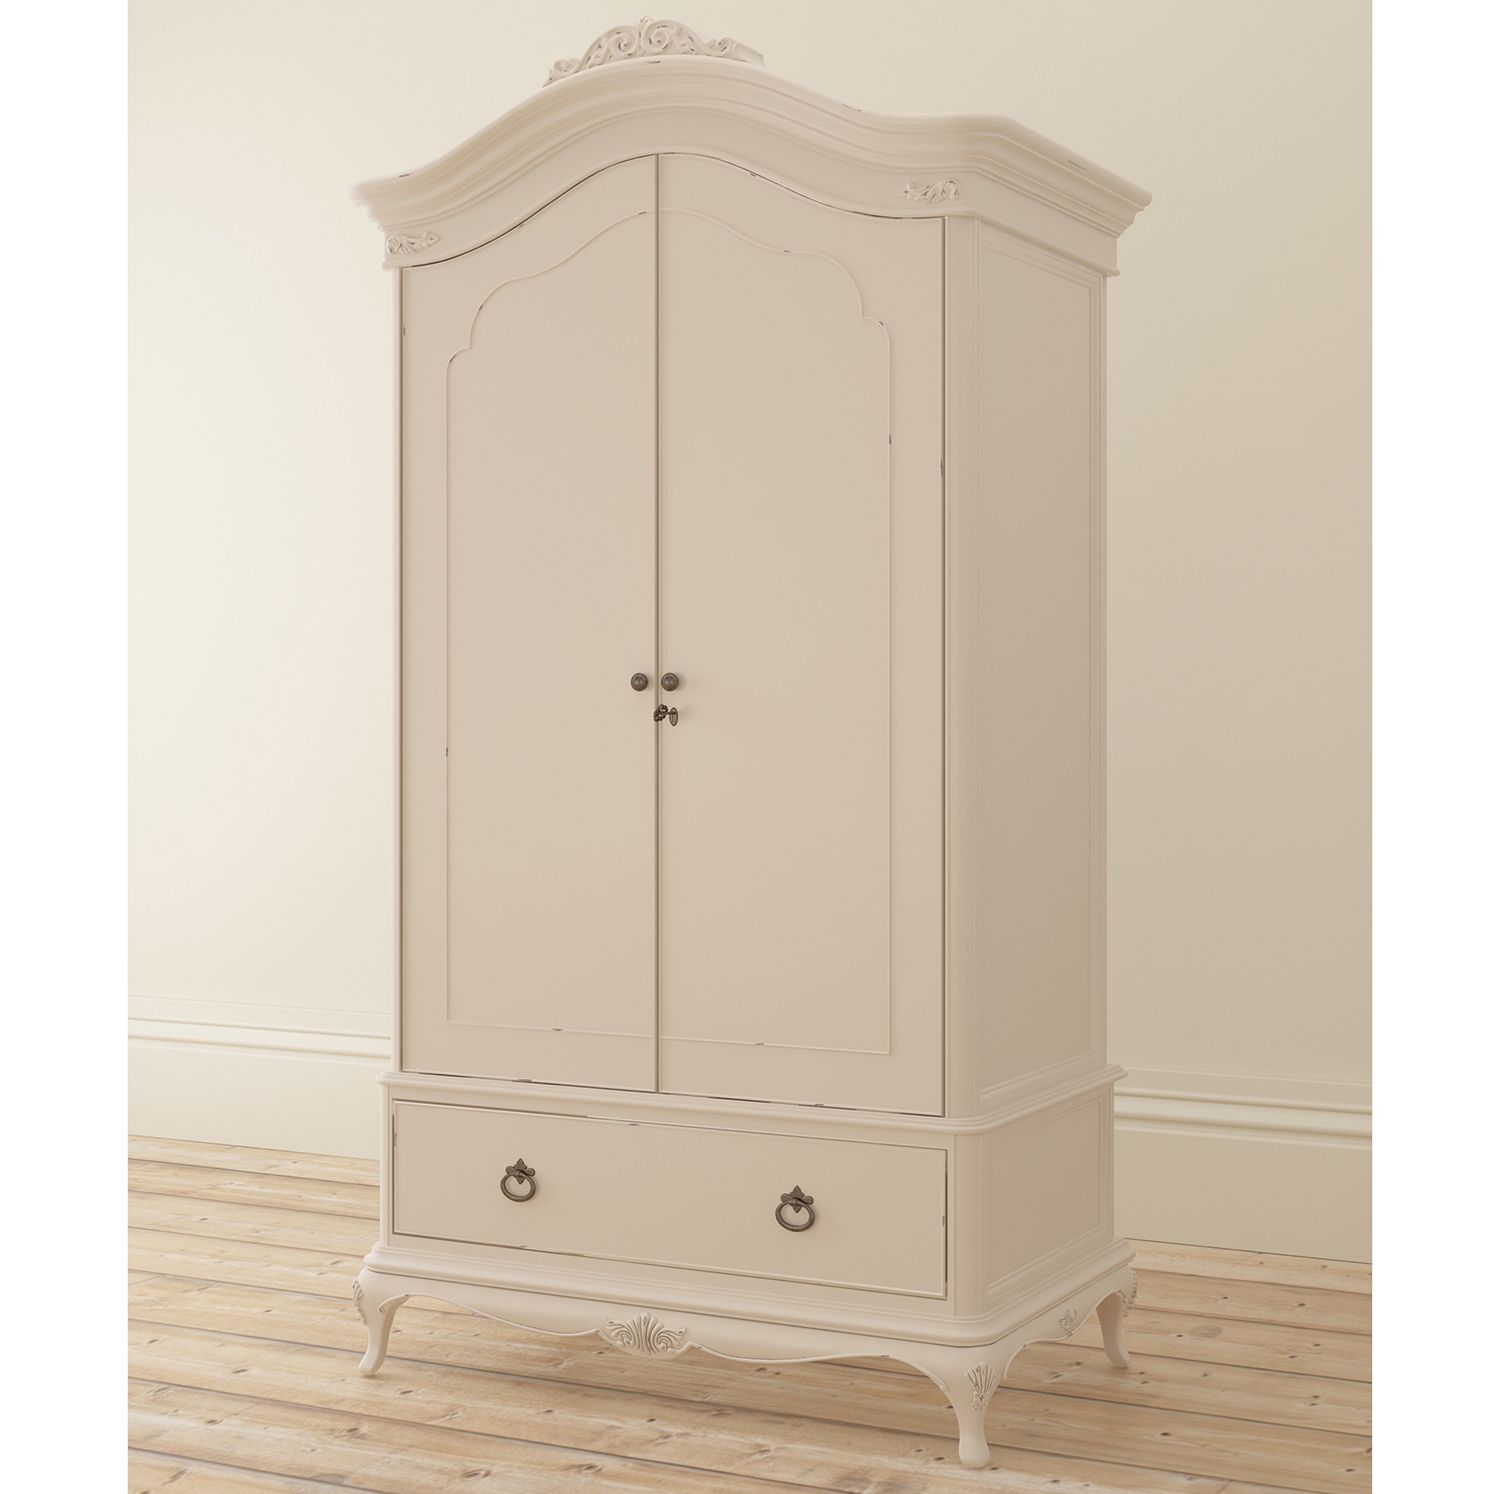 Willis & Gambier Ivory Double Wardrobe • Collingwood Batchellor Throughout Willis And Gambier Wardrobes (Gallery 16 of 20)